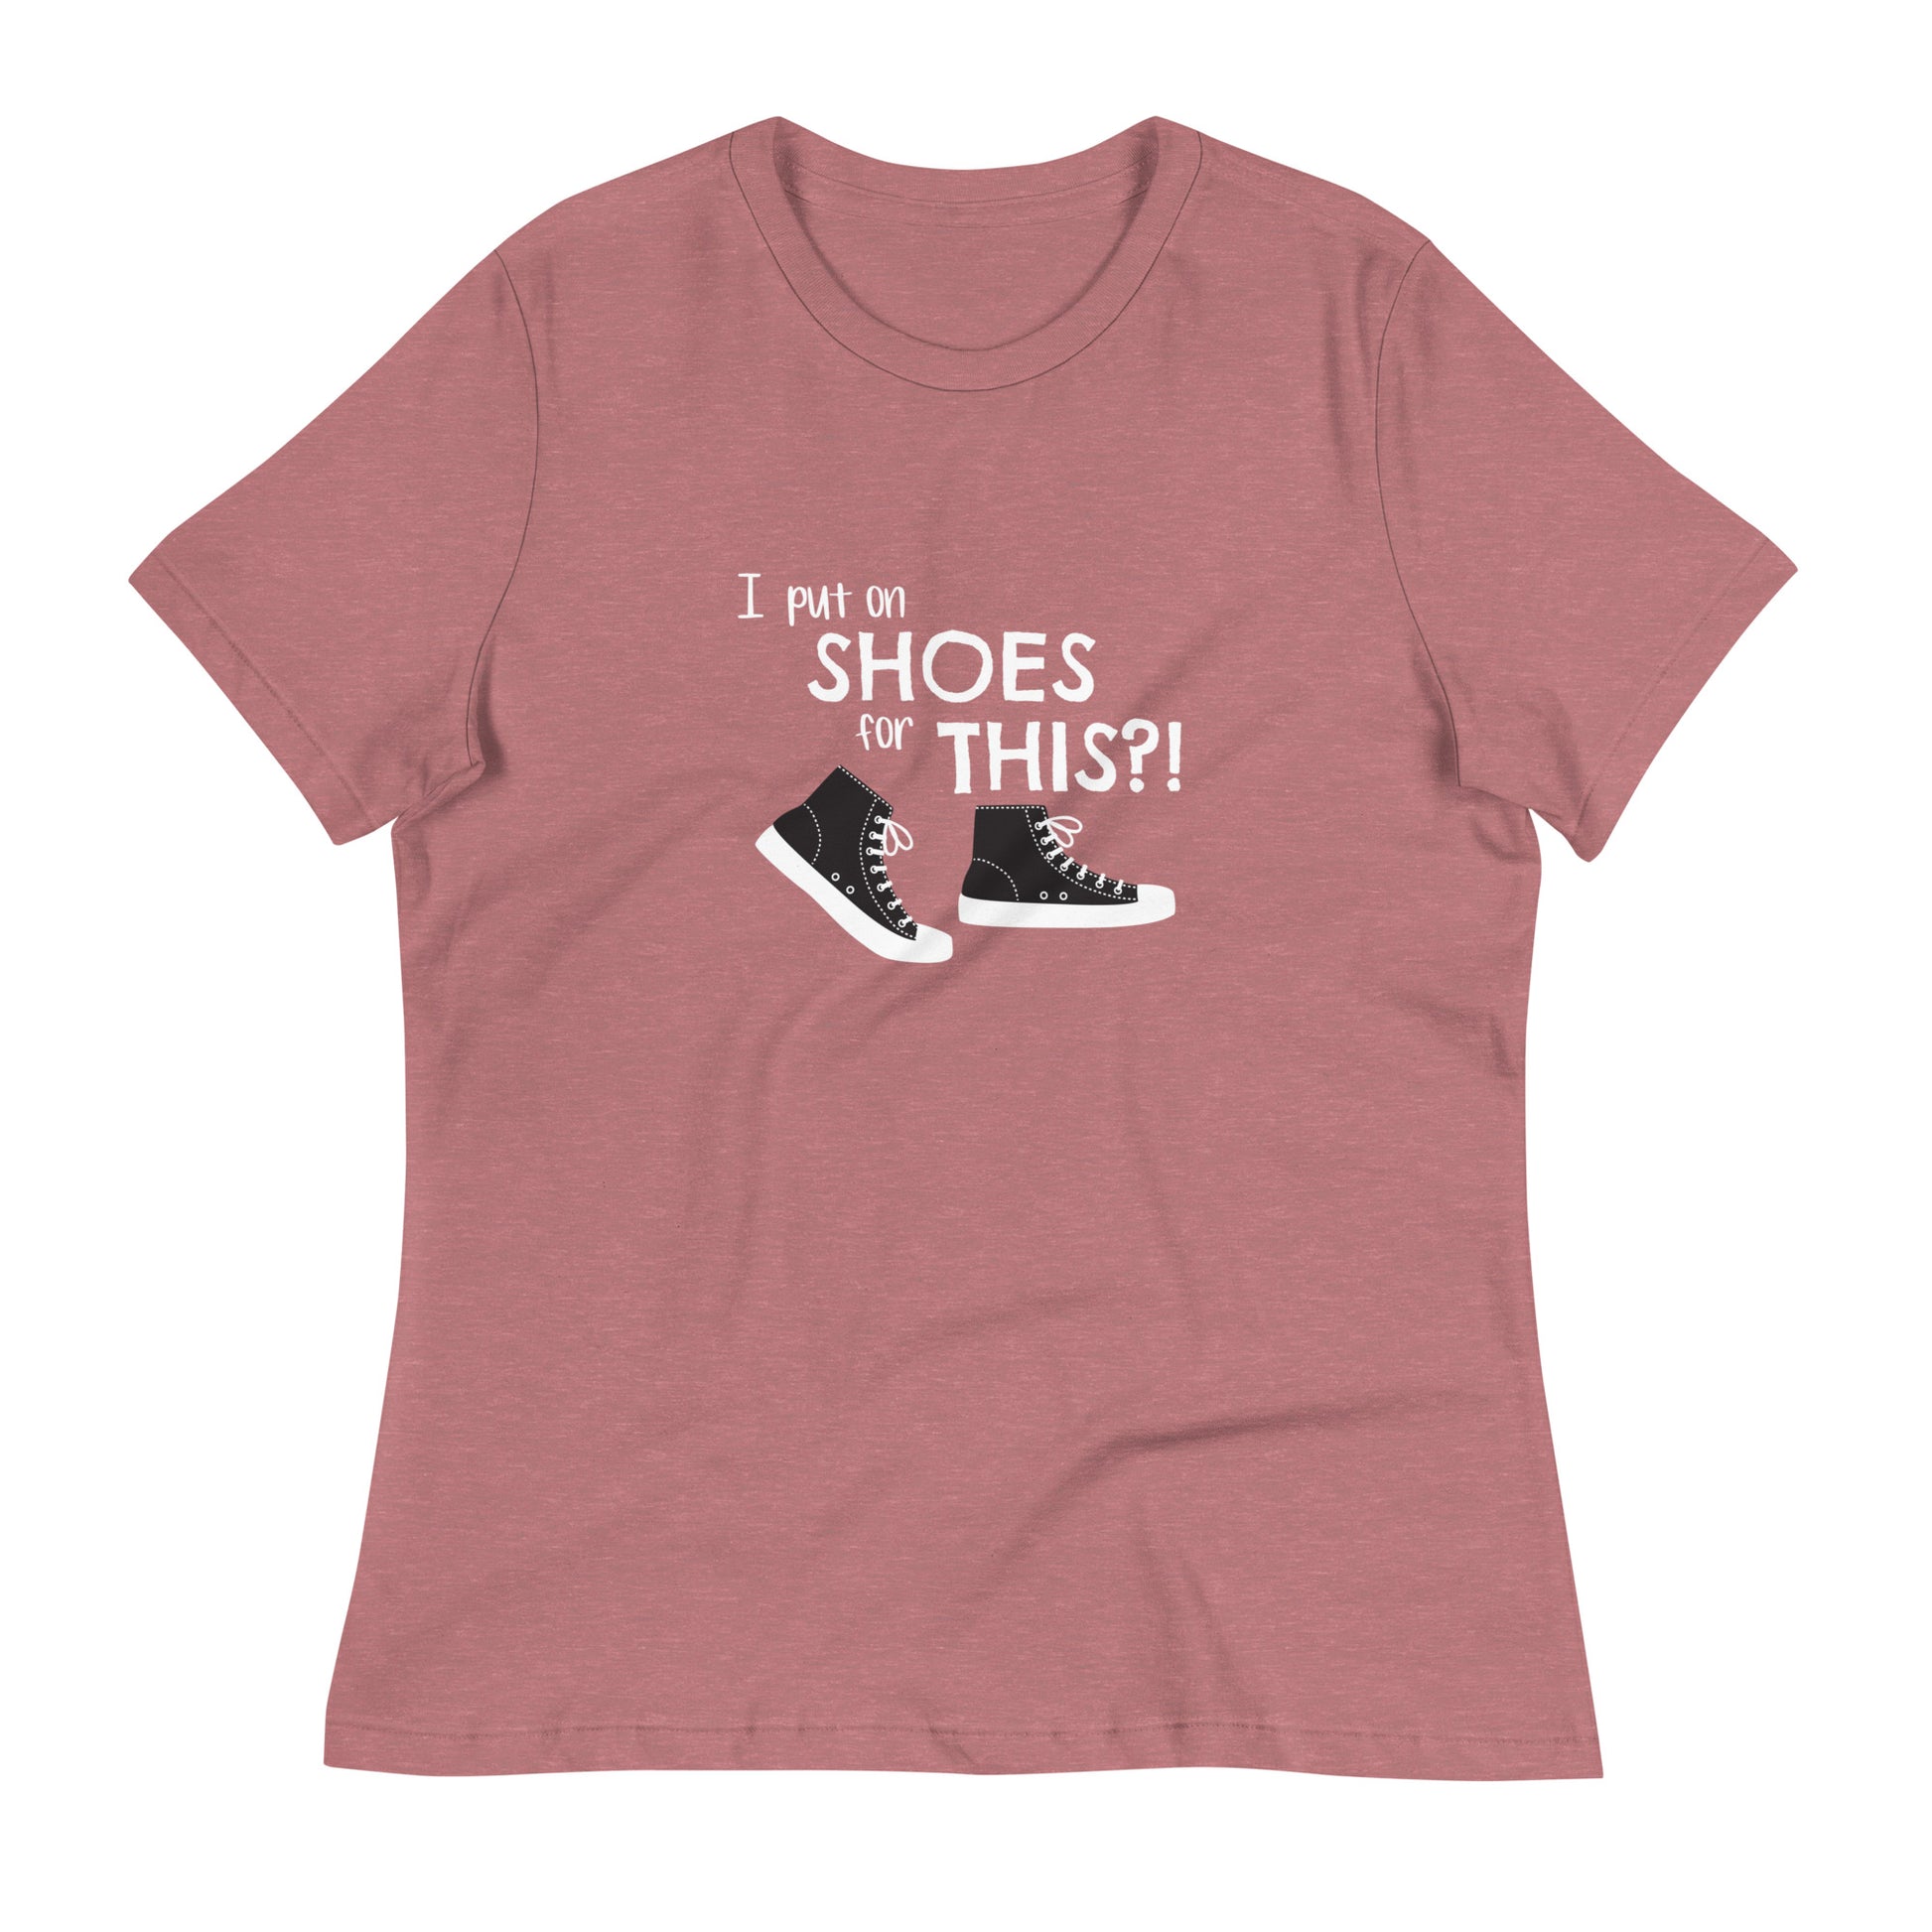 Heather Mauve women's relaxed fit t-shirt with graphic of black and white canvas "chuck" sneakers and text: "I put on SHOES for THIS?!"